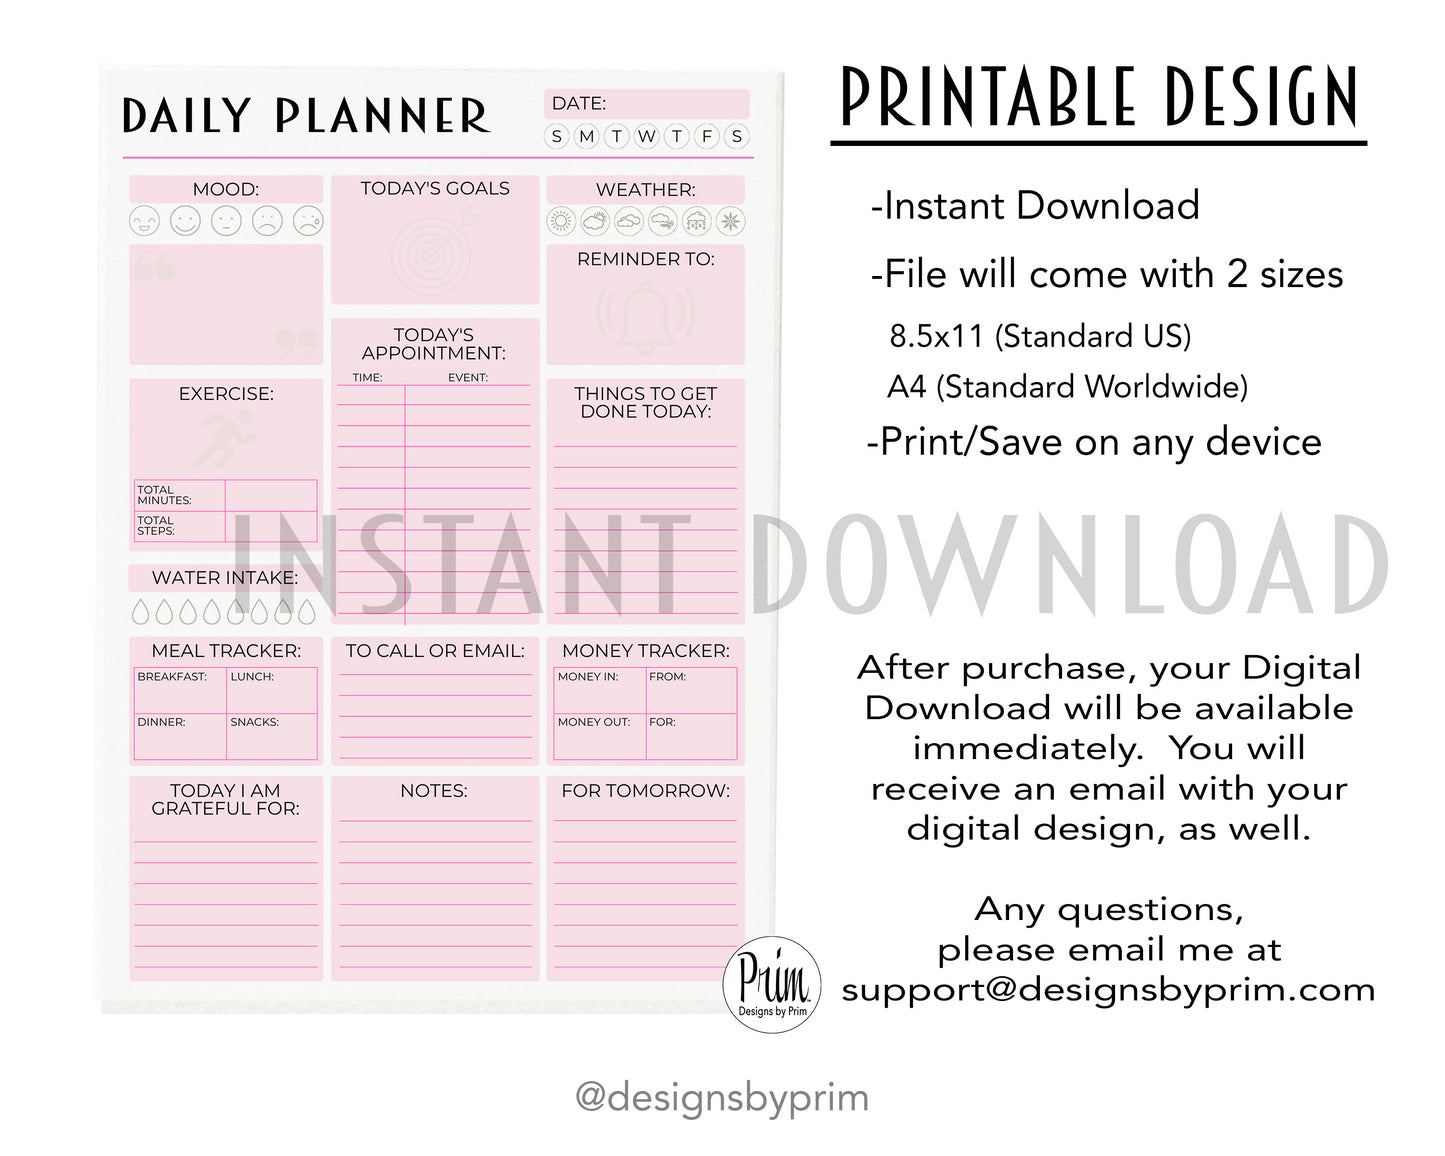 Designs by Prim Daily Planner Undated Pink | Mood Tracker Fitness Exercise Water Intake Meal Tracker Goals Appointments Weather Reminder Money Tracker